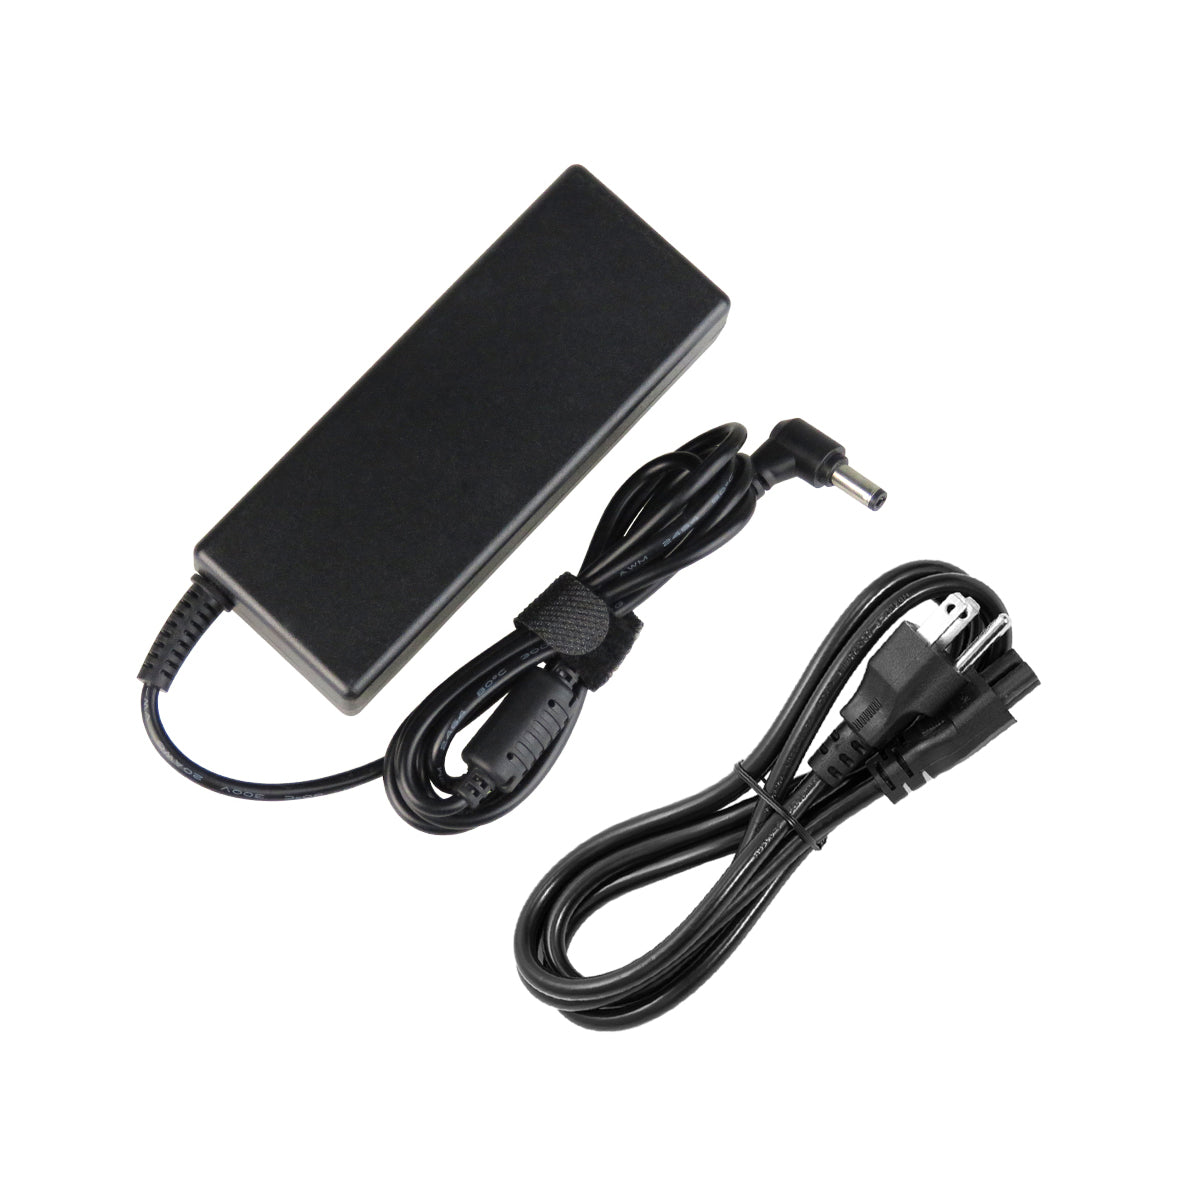 AC Adapter Charger for Gateway MX8700 Notebook.